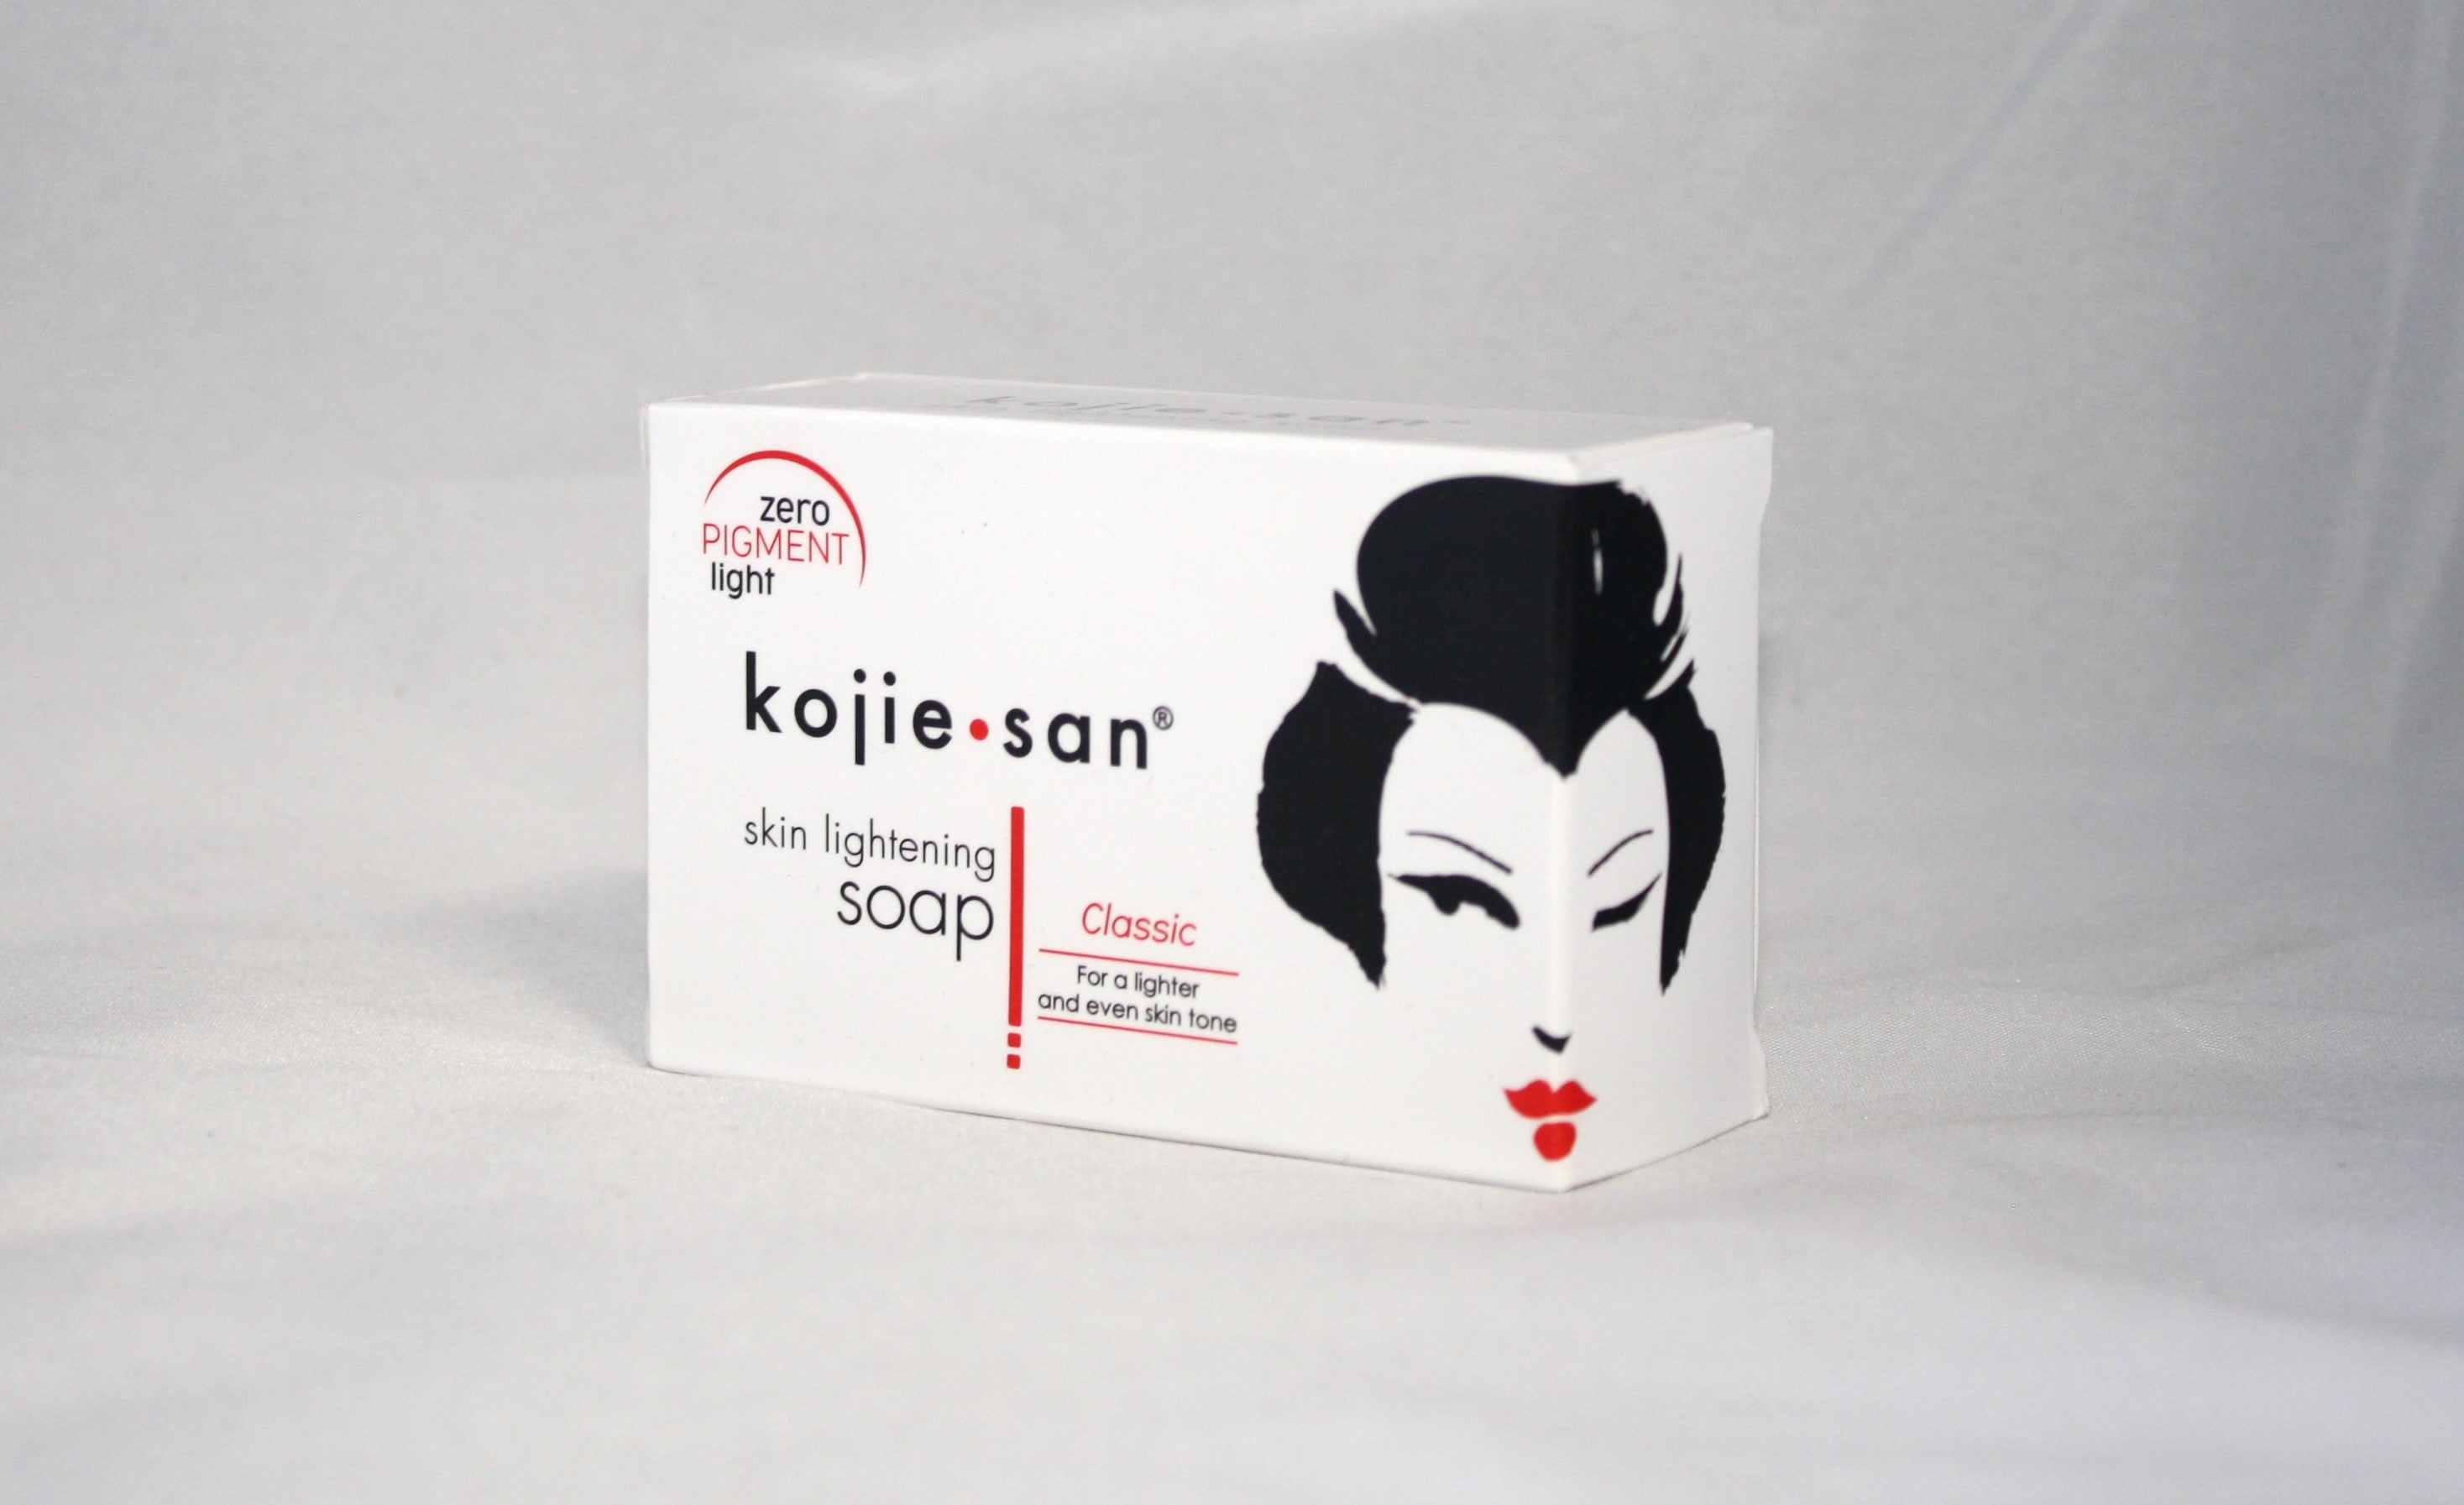 Is my Kojie San skin lighting soap real or fake? [Product Question